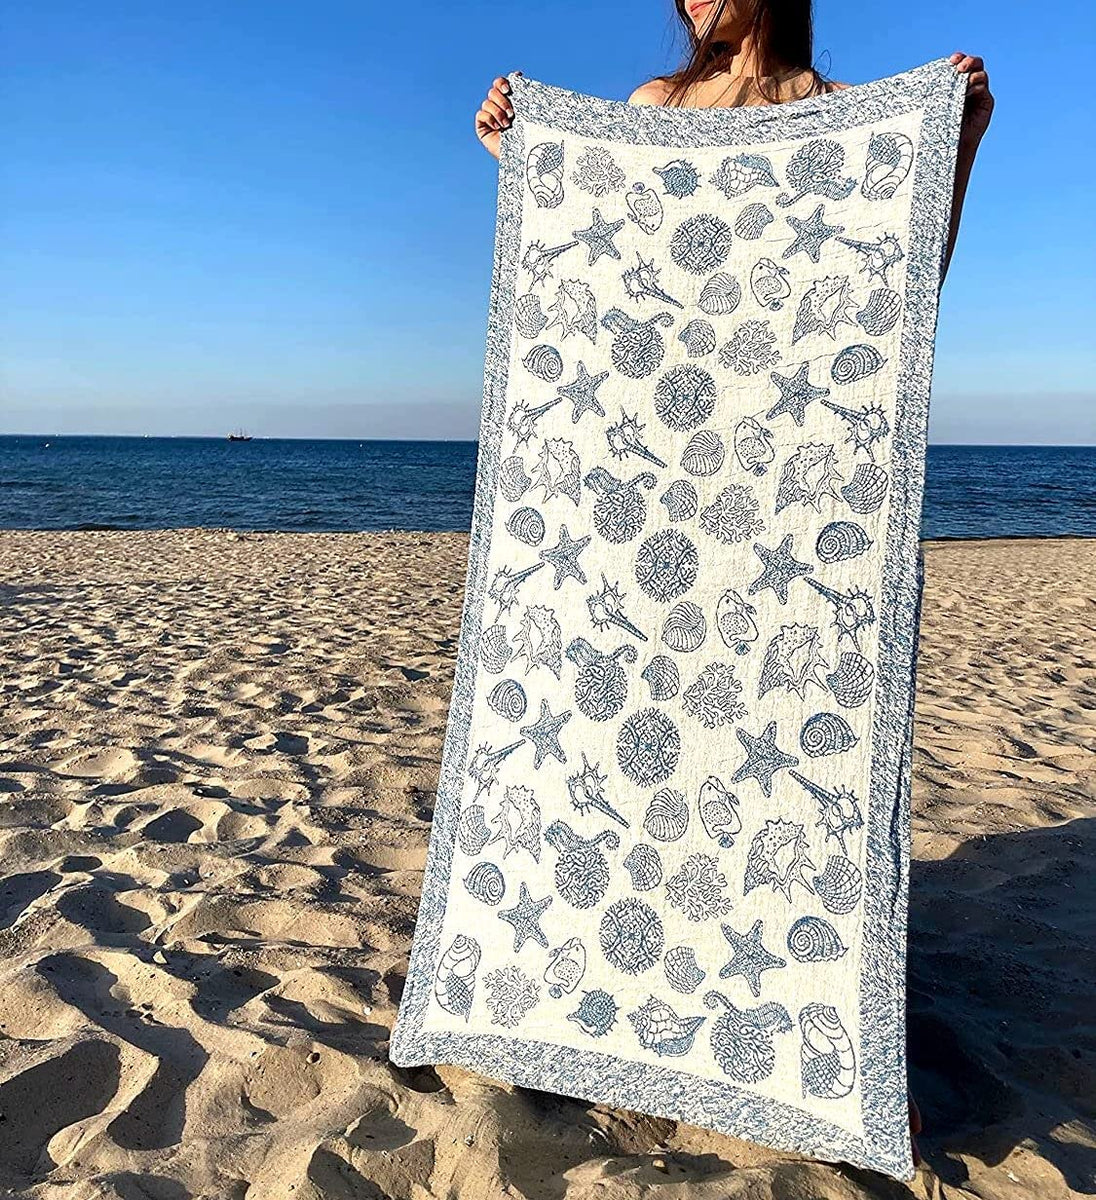 XL Flax Linen Bath Beach Towel Sheet Sauna Beach Travel Towels Eco-friendly  Pre-washed in Any Color 